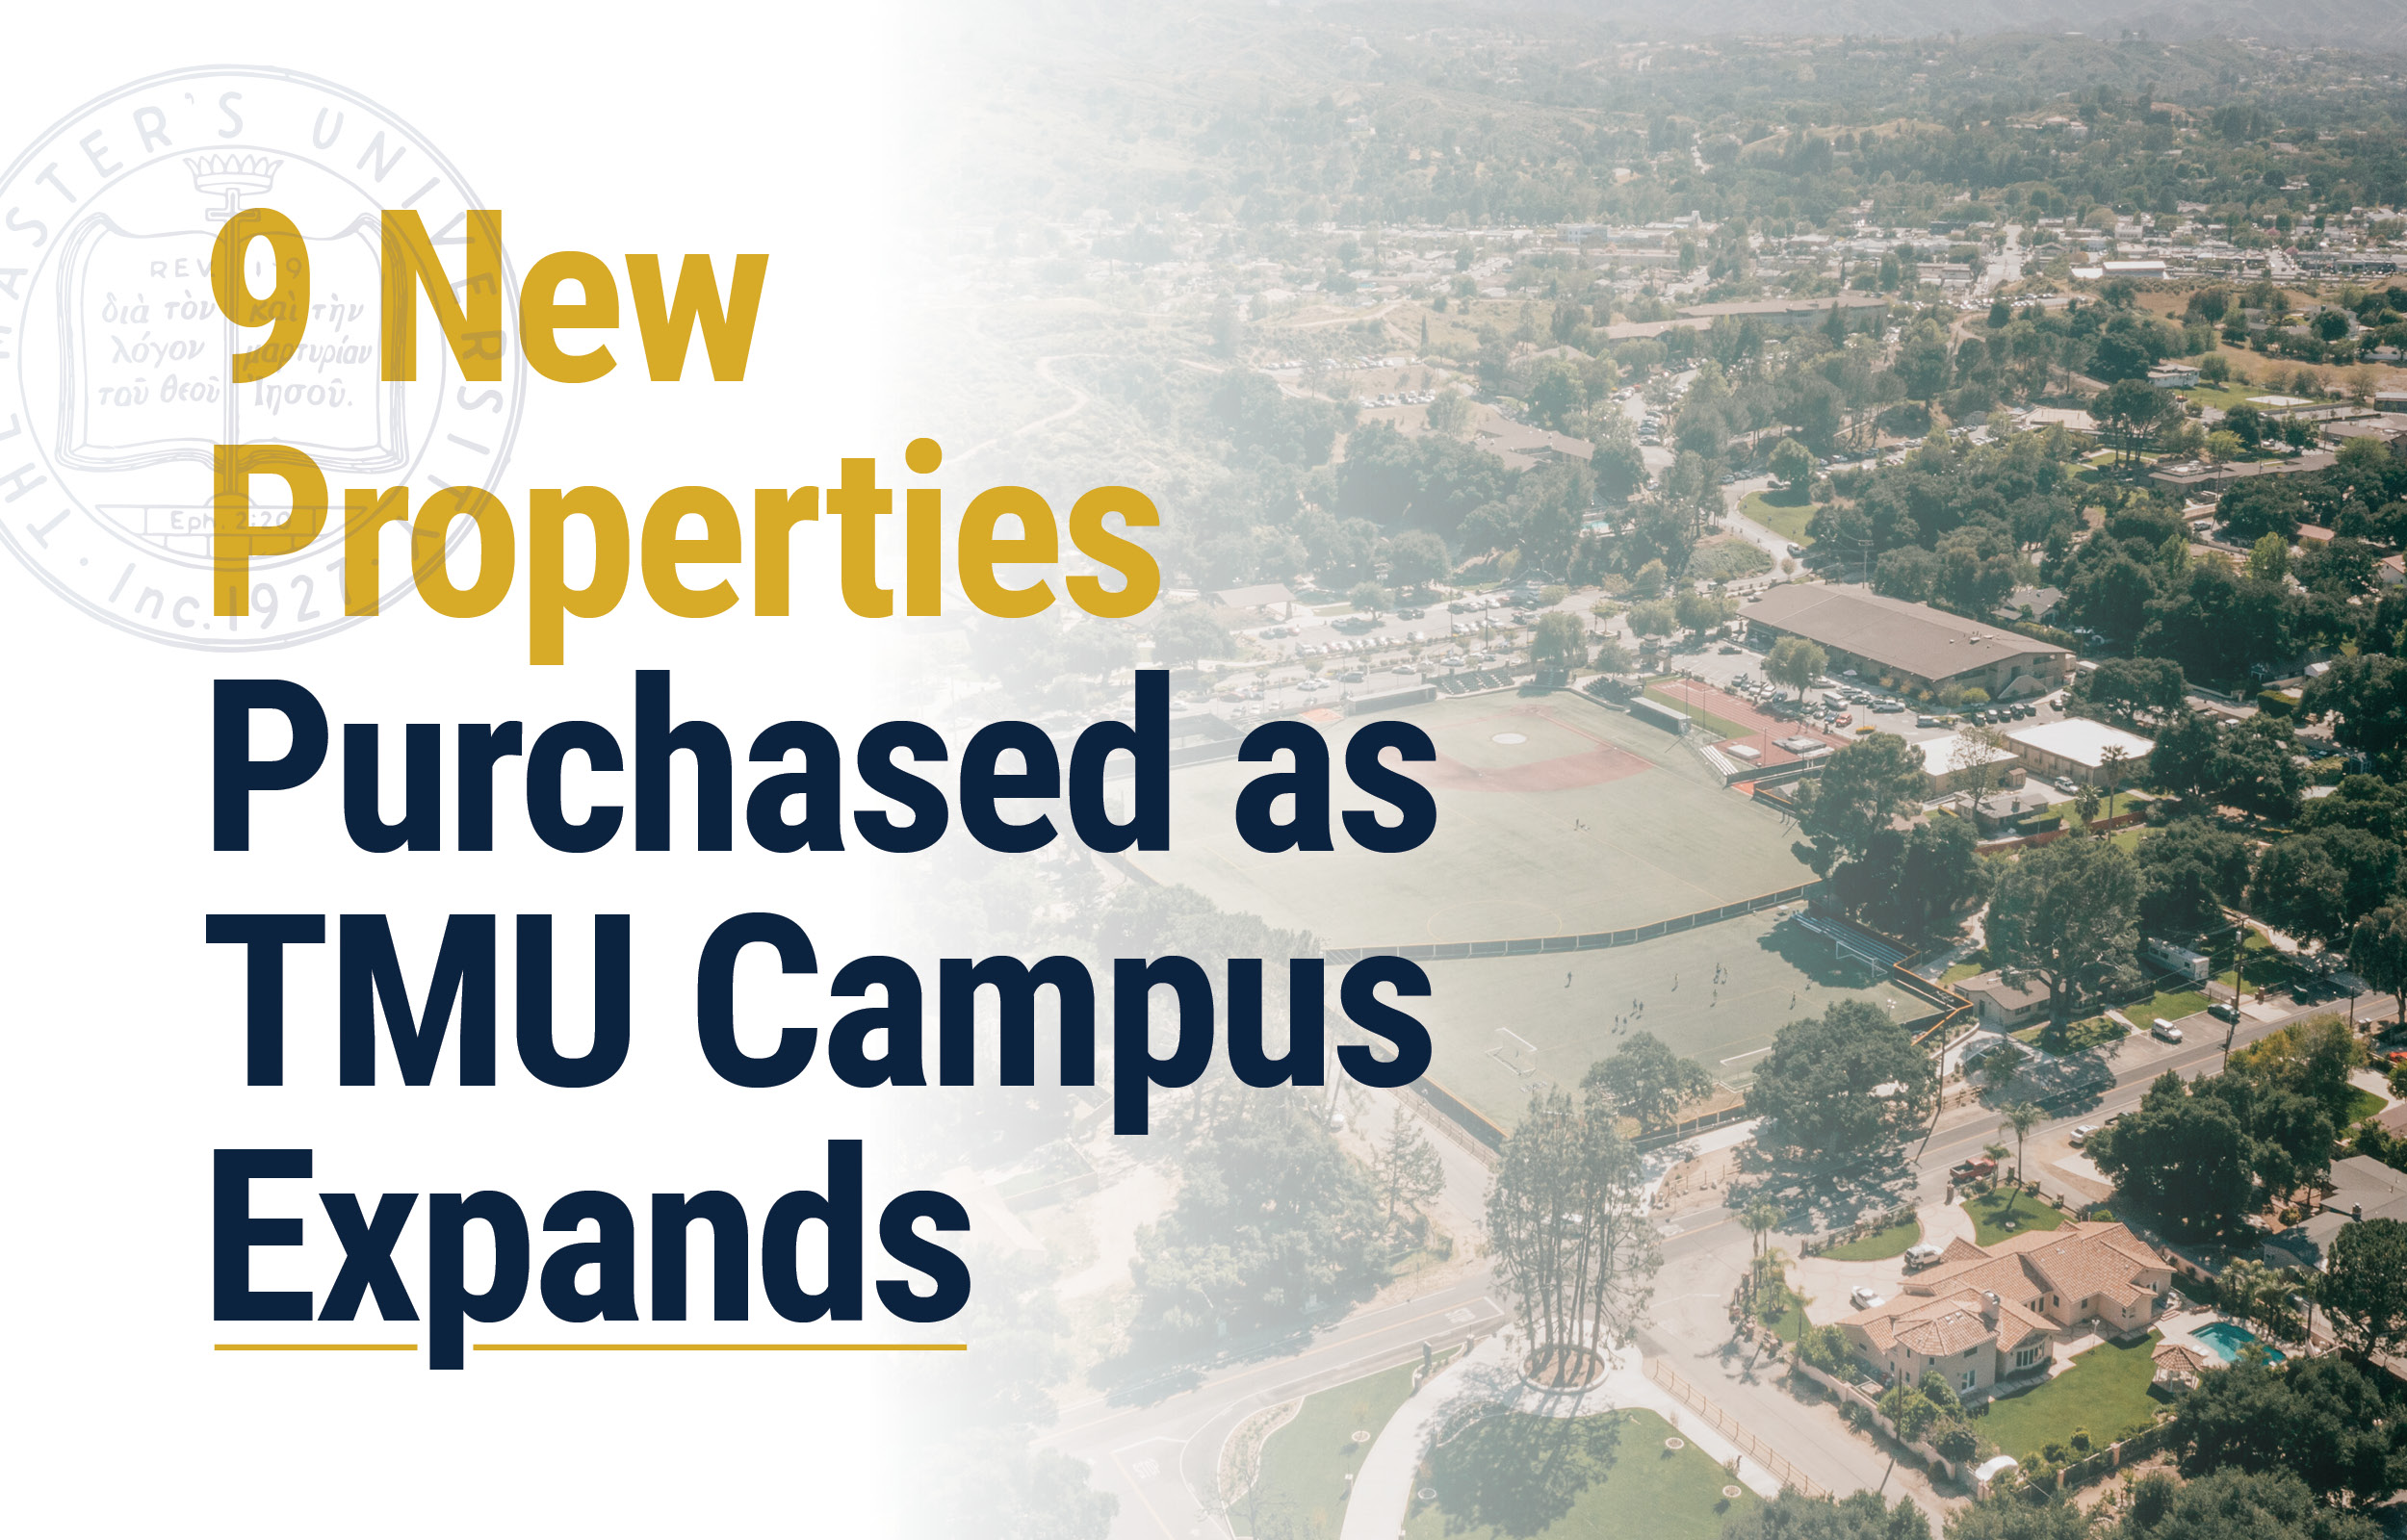 TMU Campus Expands With Purchase of 9 New Properties Featured Image